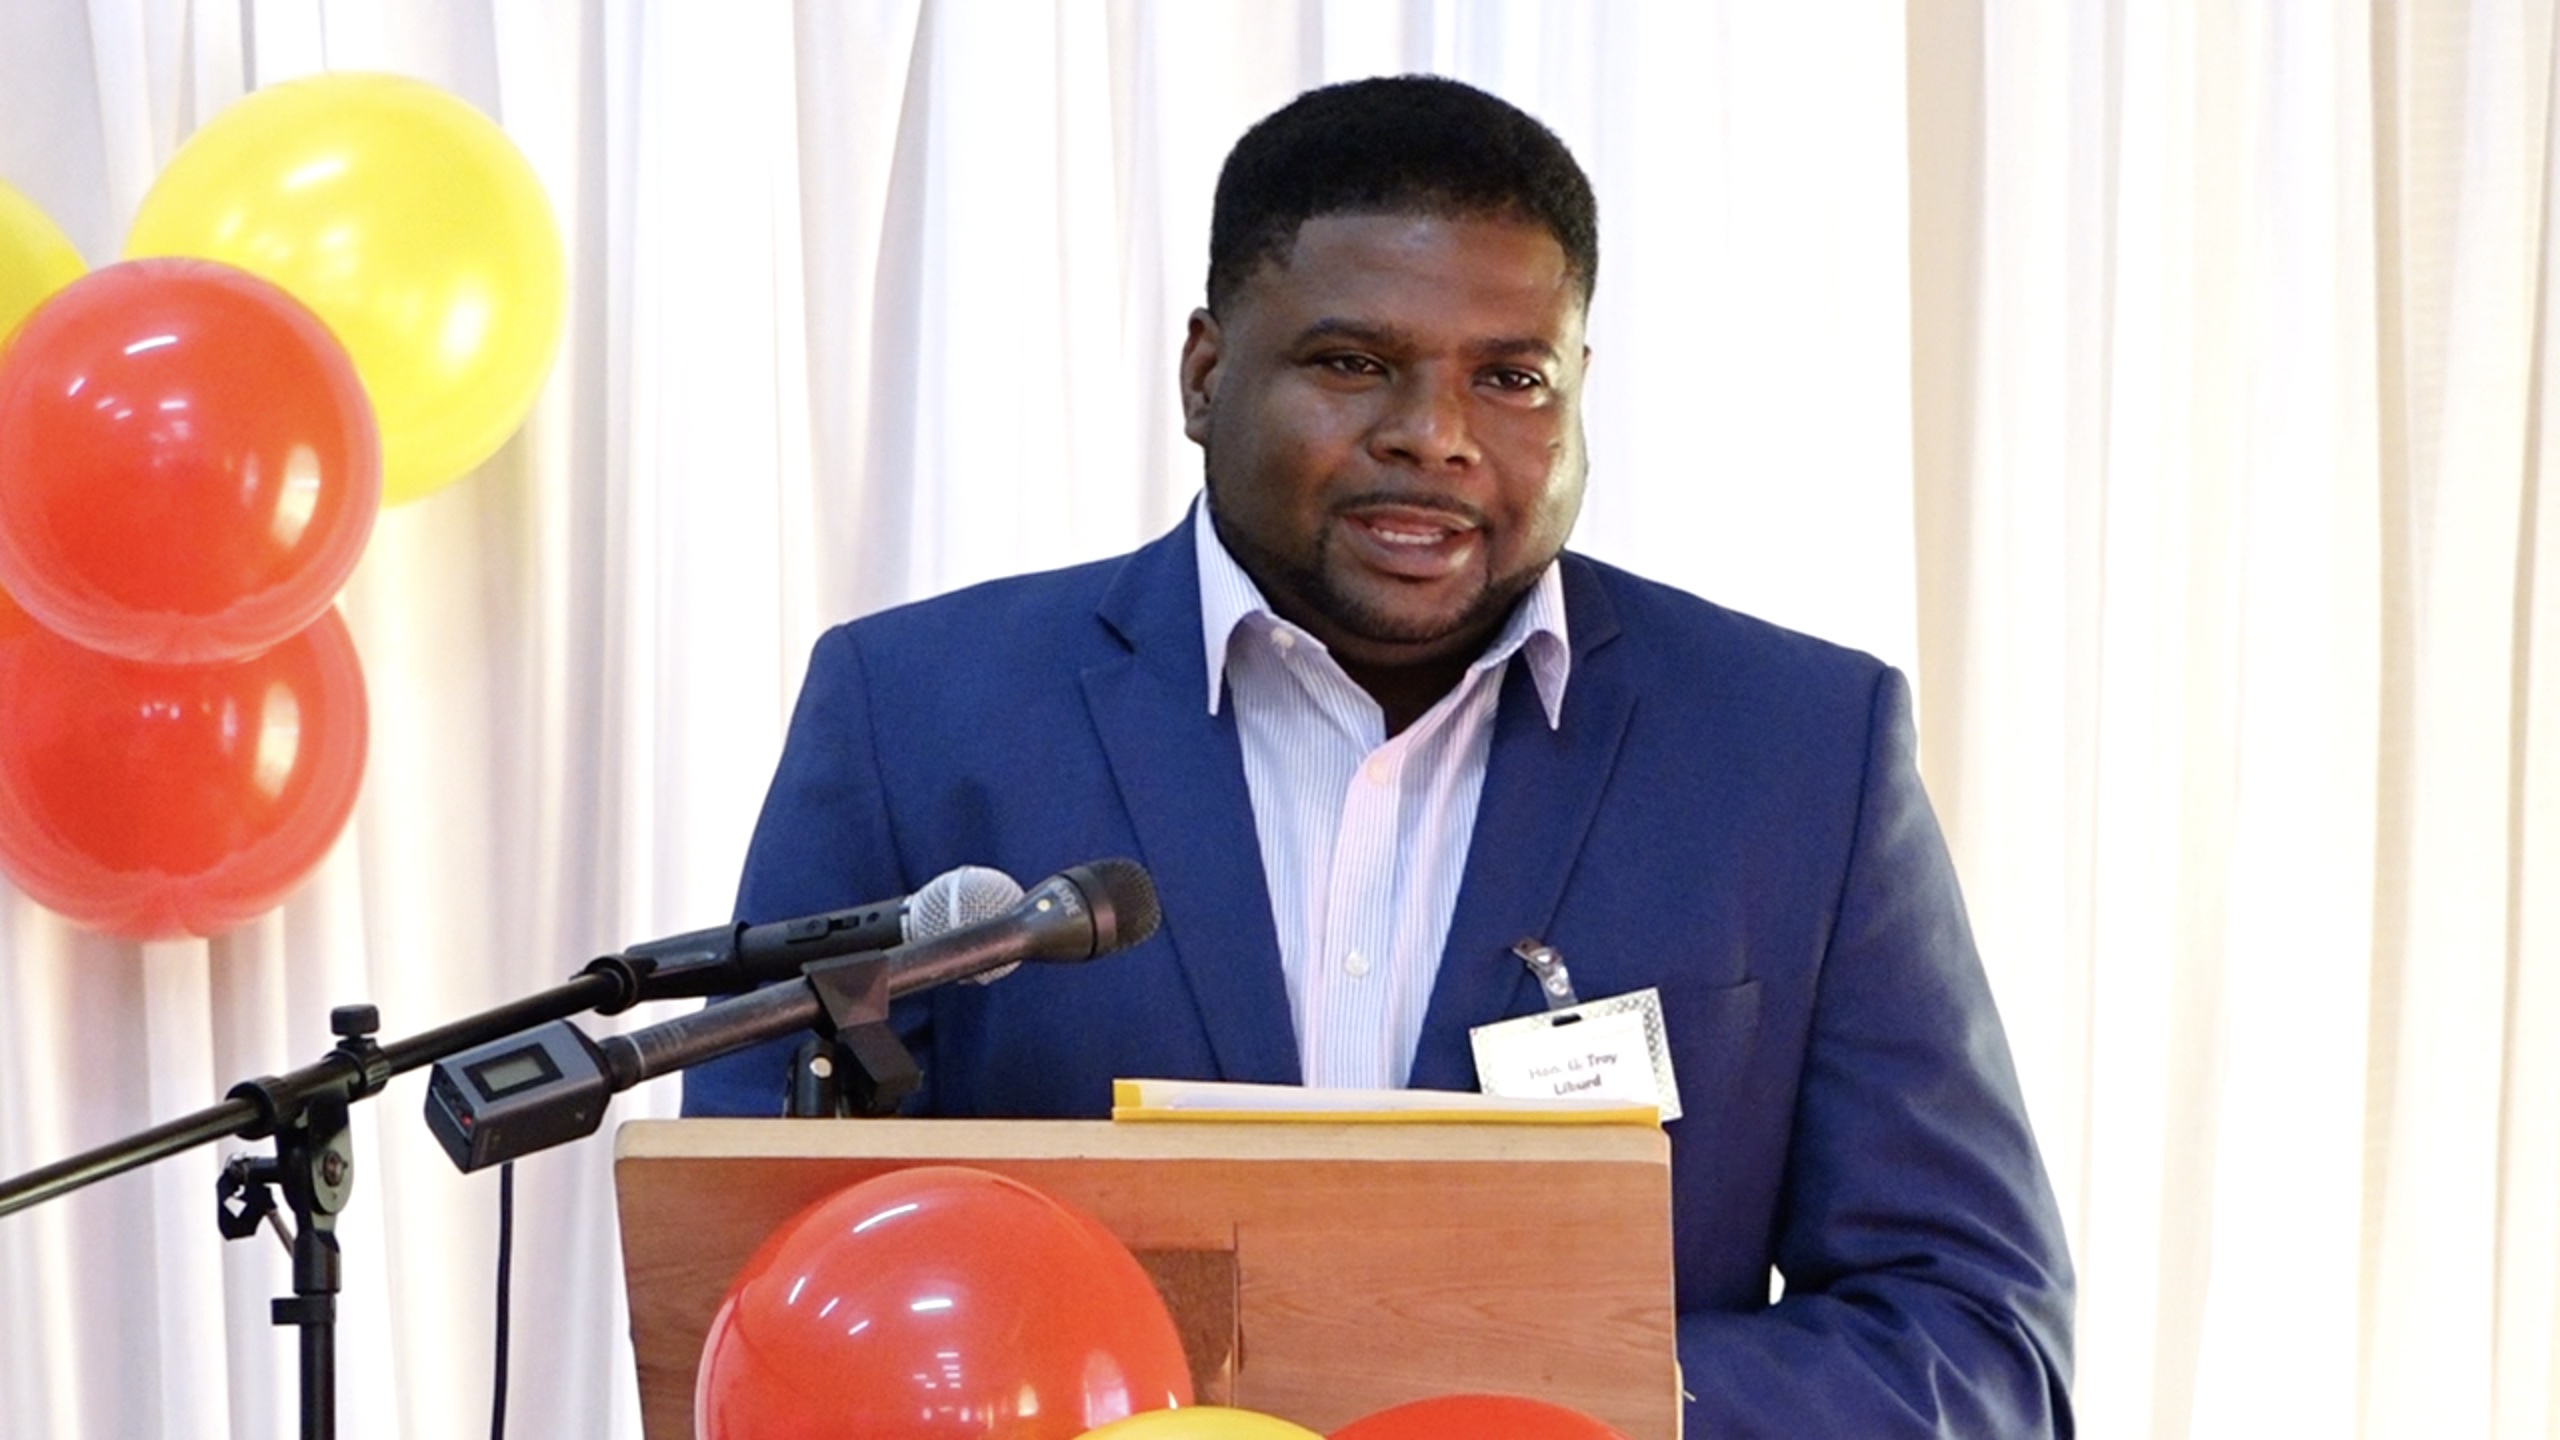 Hon. Troy Liburd, Junior Minister of Education in the Nevis Island Administration, addressing participants of the Department of Education’s Prospective Teachers' Course 2021 opening ceremony on July 19, 2021, at the Jessups Community Centre